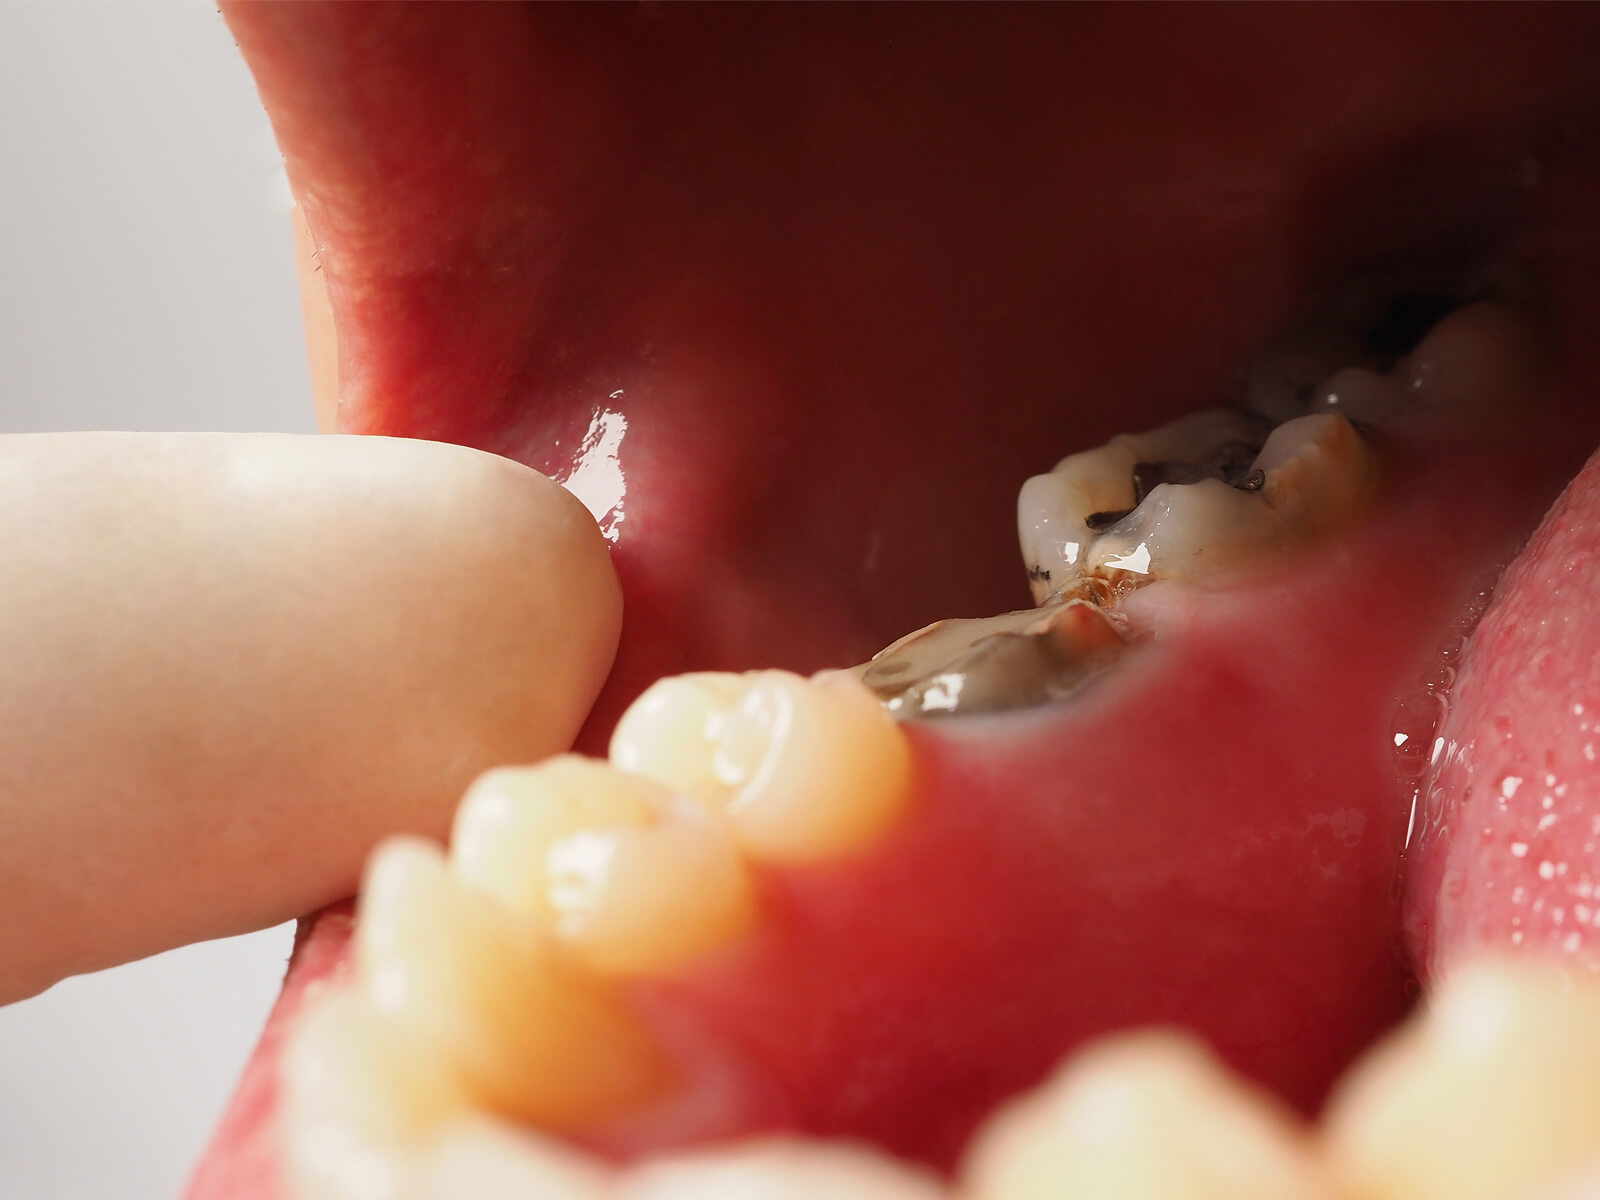 Tartar Deposits On Teeth: Treatment And Prevention